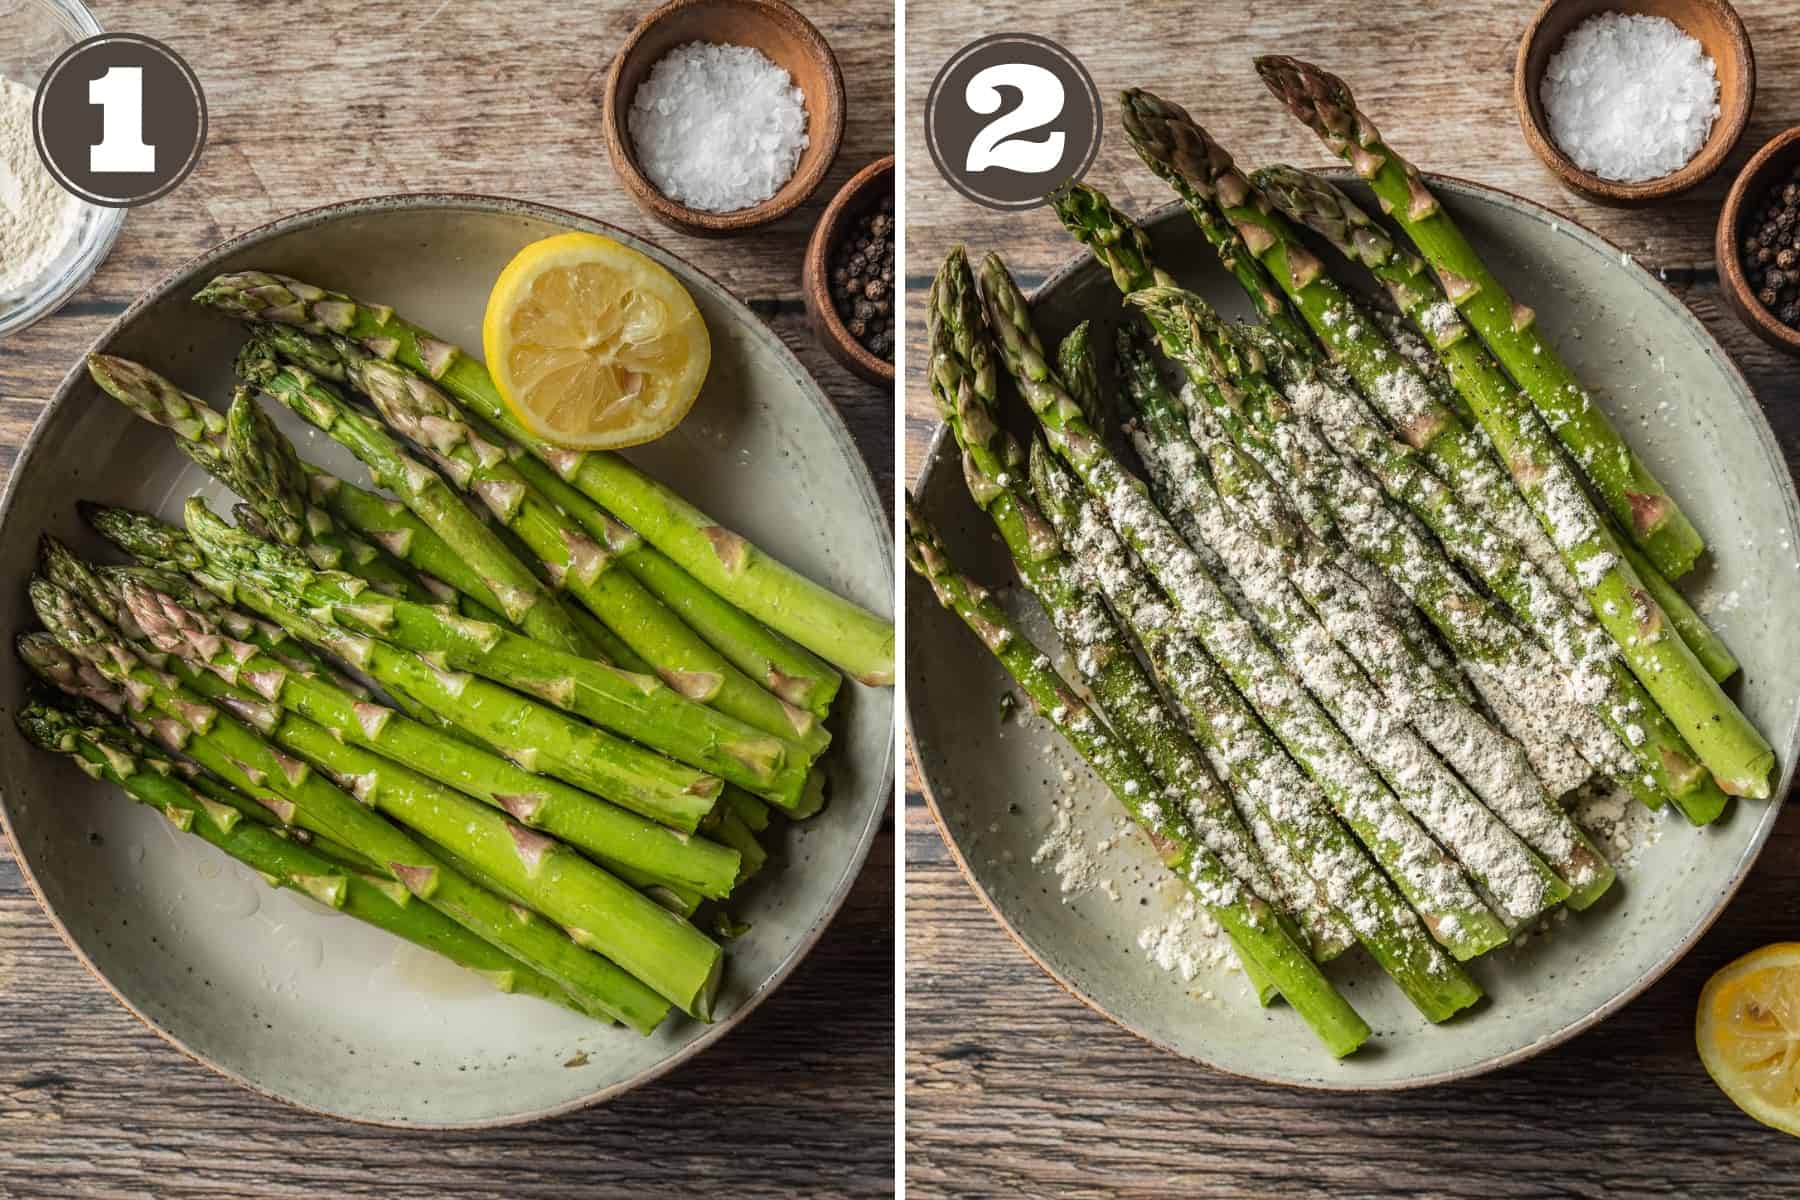 Side by side photos showing green asparagus in a bowl drizzled with oil, lemon juice, and sprinkles with garlic powder.